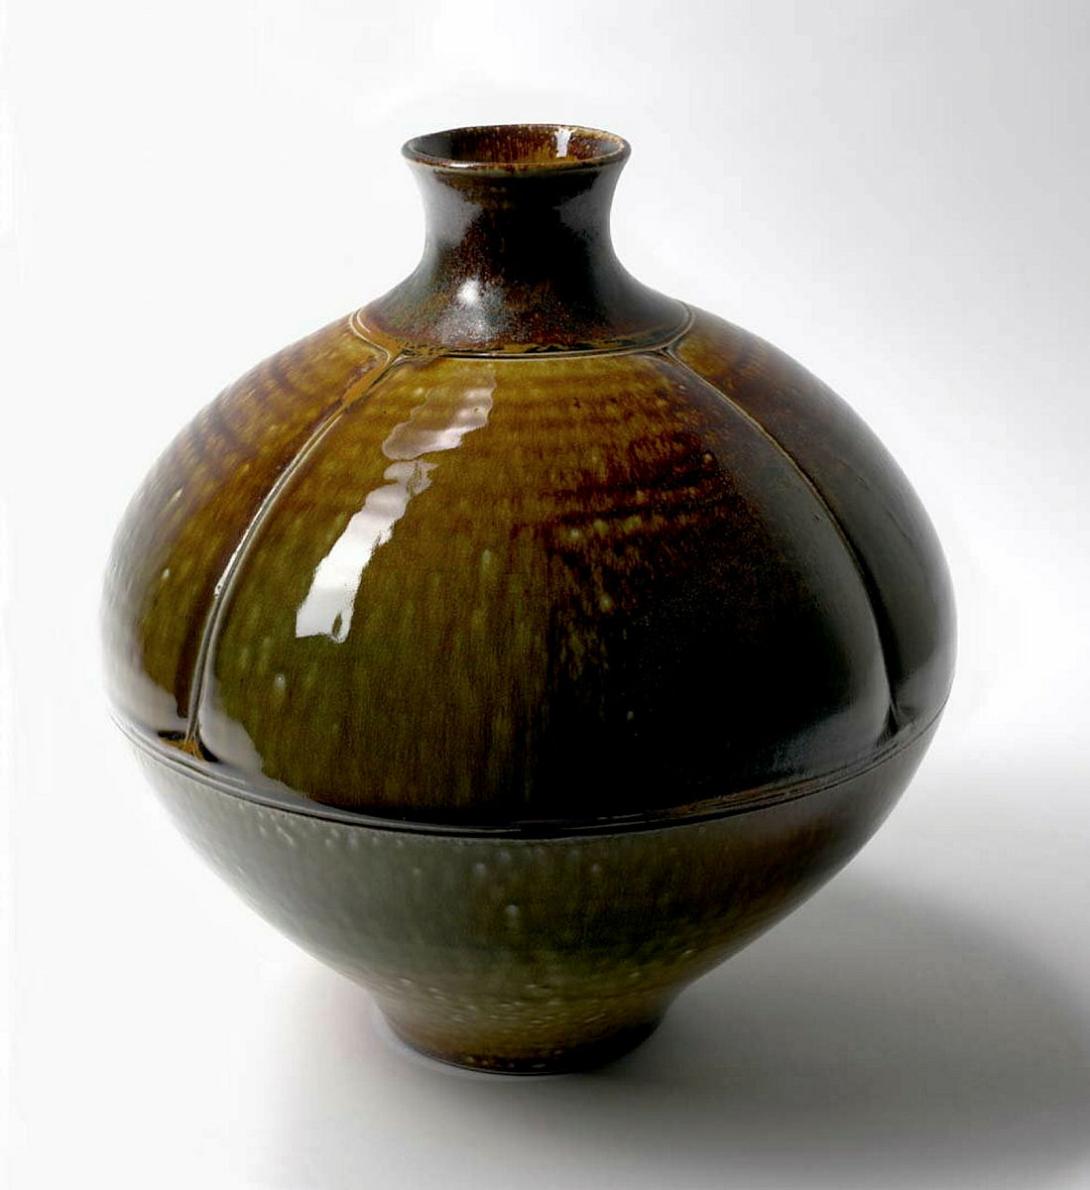 Artwork Vase this artwork made of Stoneware, wheelthrown with incised lines dividing top section into four segments, salt glaze, created in 1980-01-01